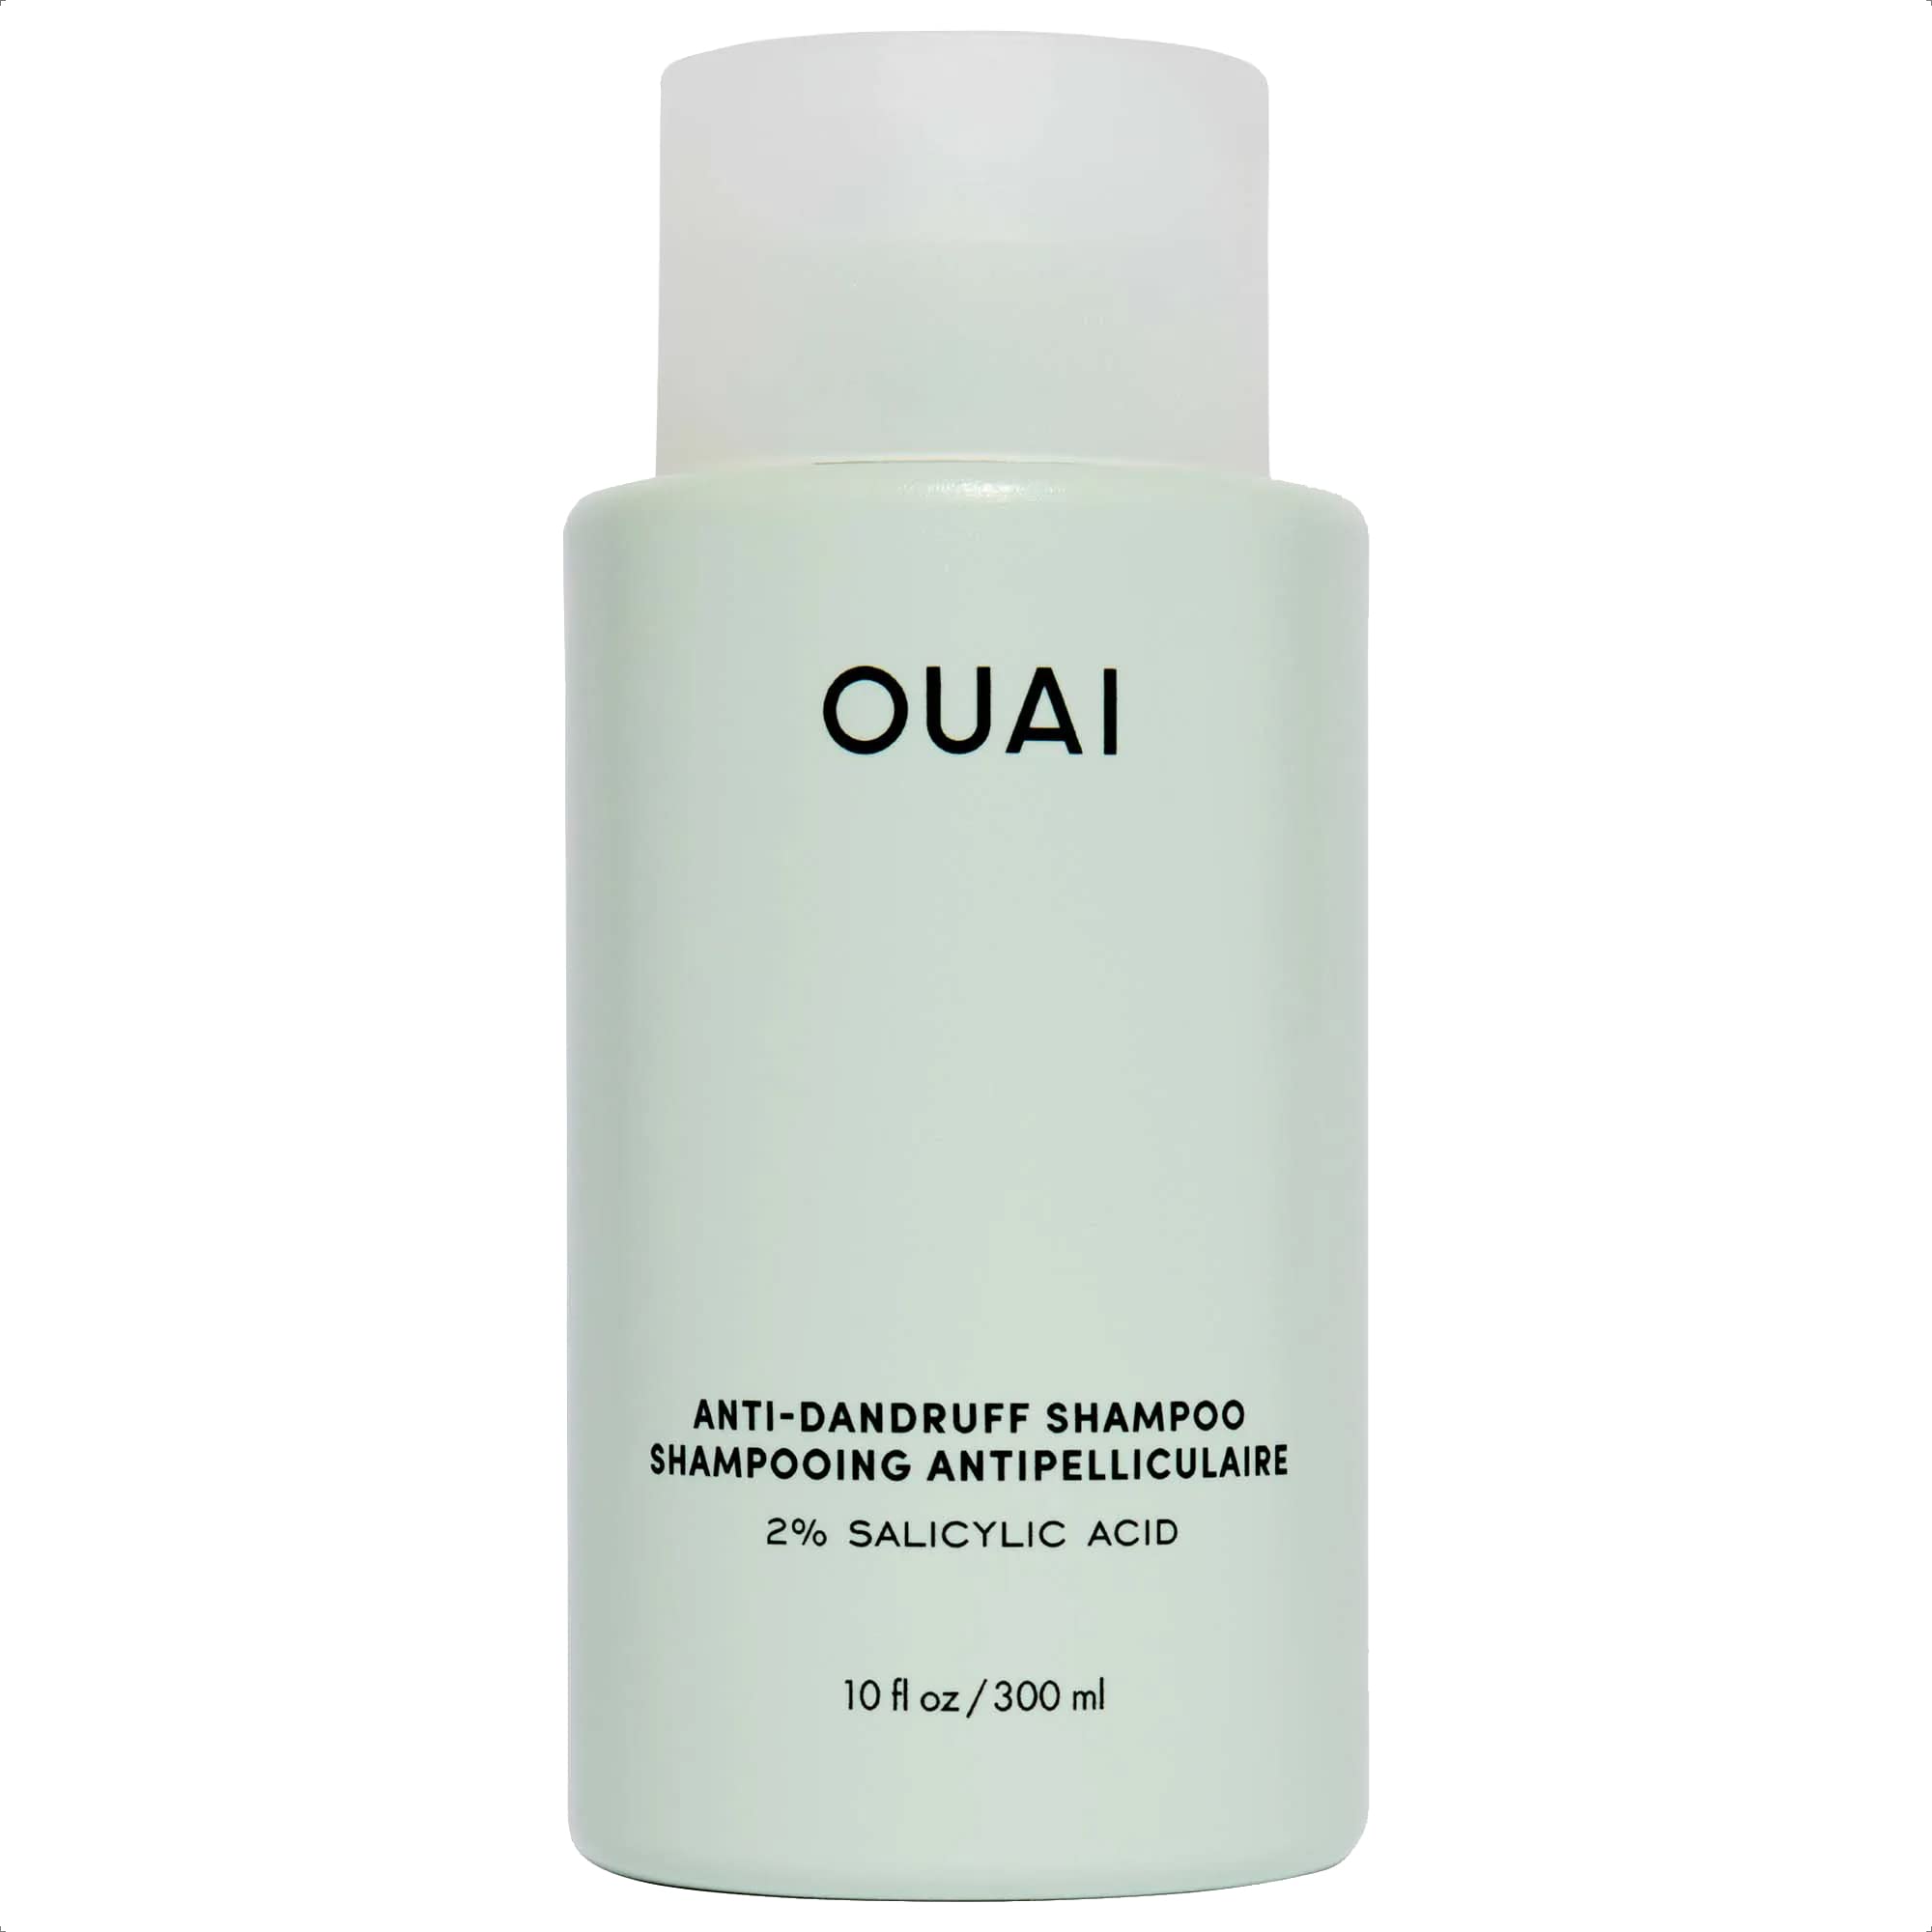 OUAI Anti-Dandruff Shampoo - Gentle Hair Cleanser with Salicylic Acid for Flaky & Dry Scalp - Reduces Itching, Redness & Irritation - 10 fl oz